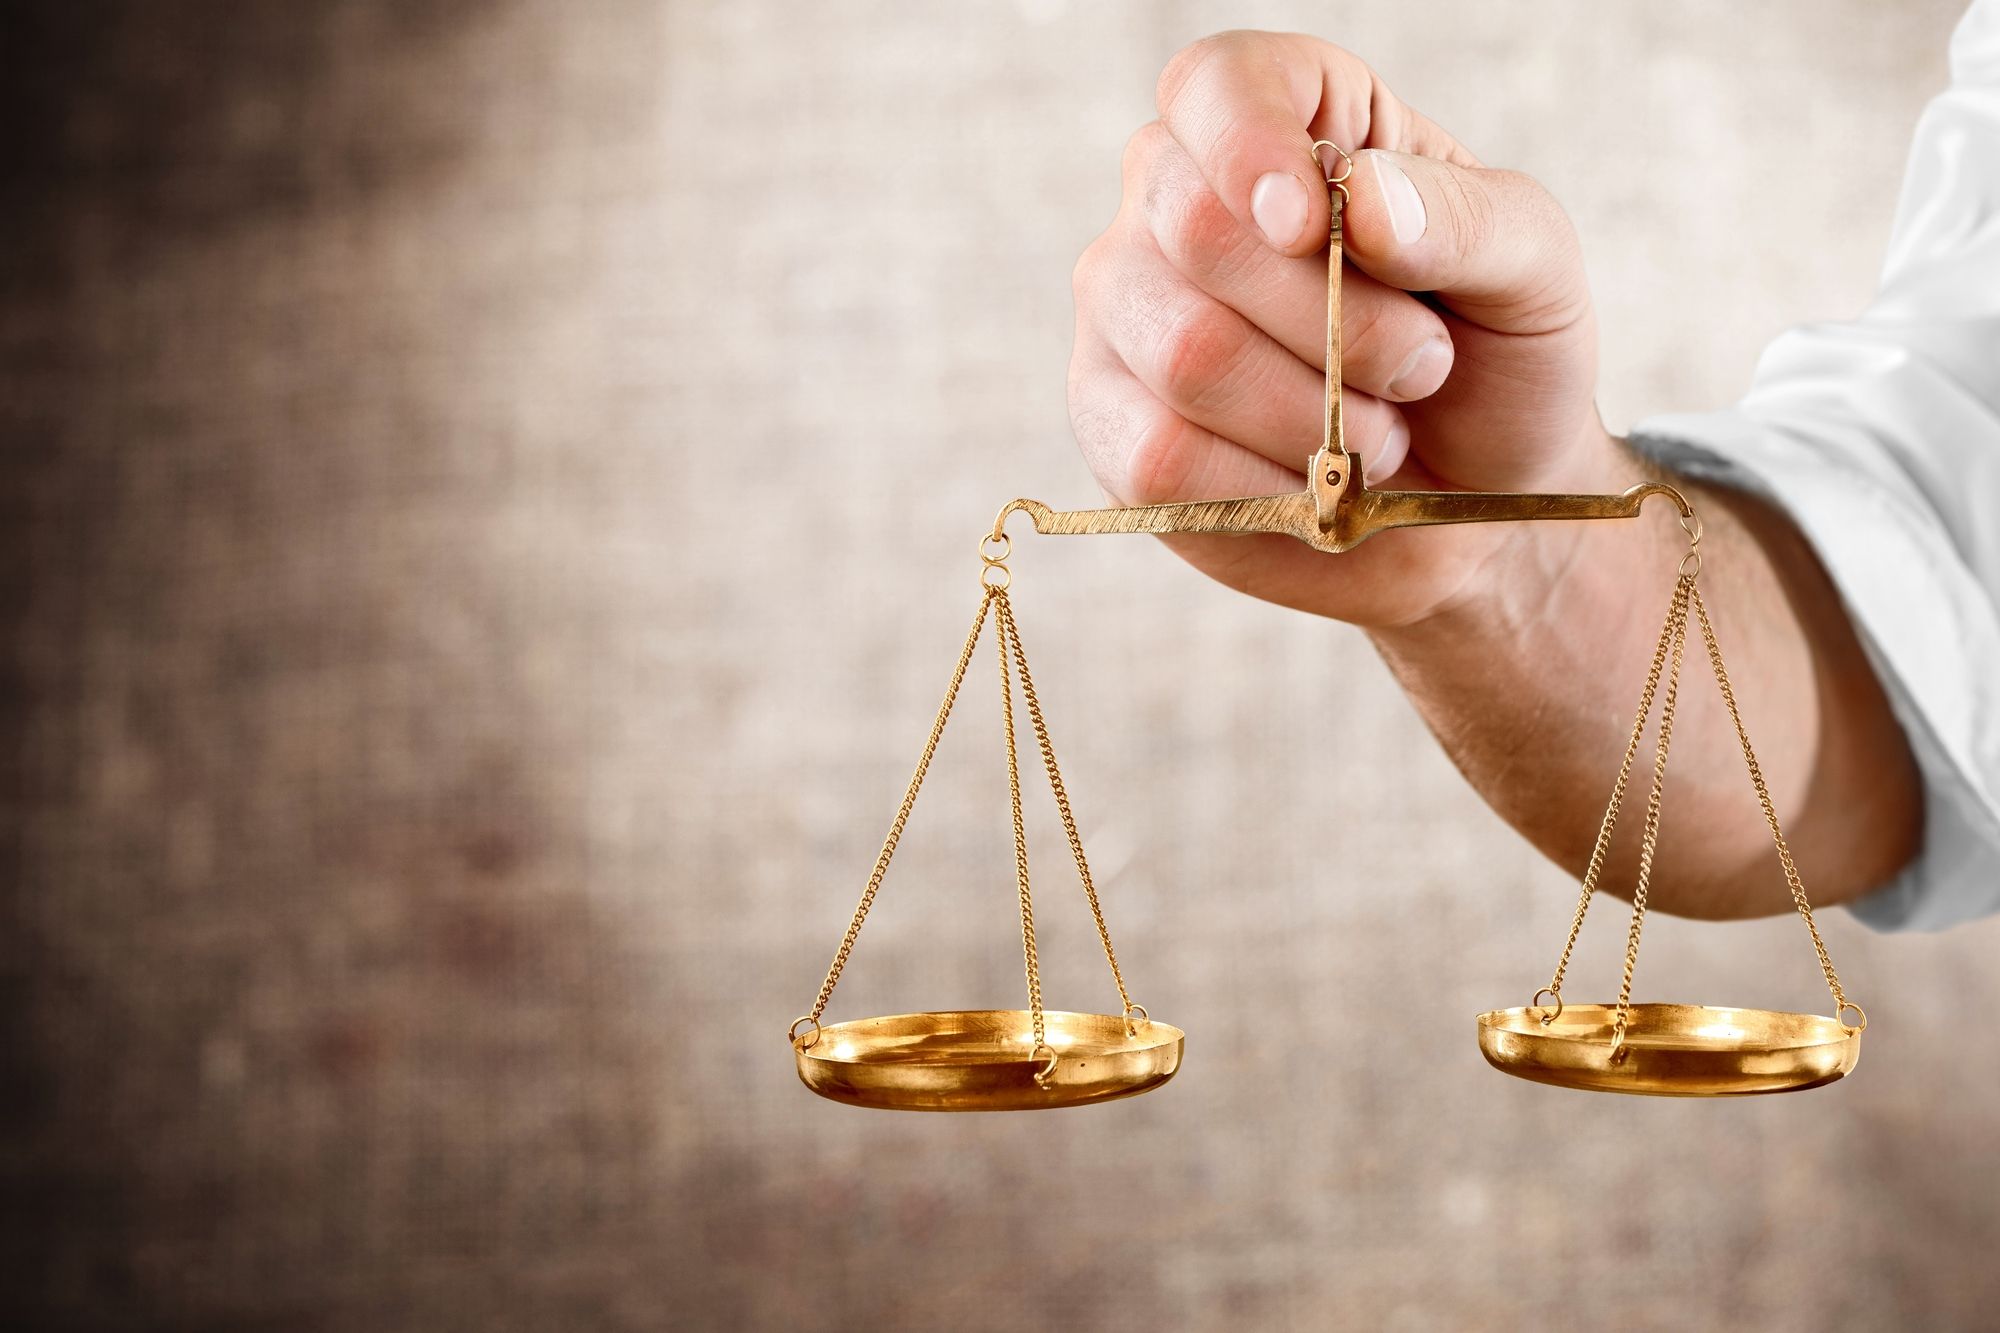 Image of a person holding the scales of justice - class action lawsuit